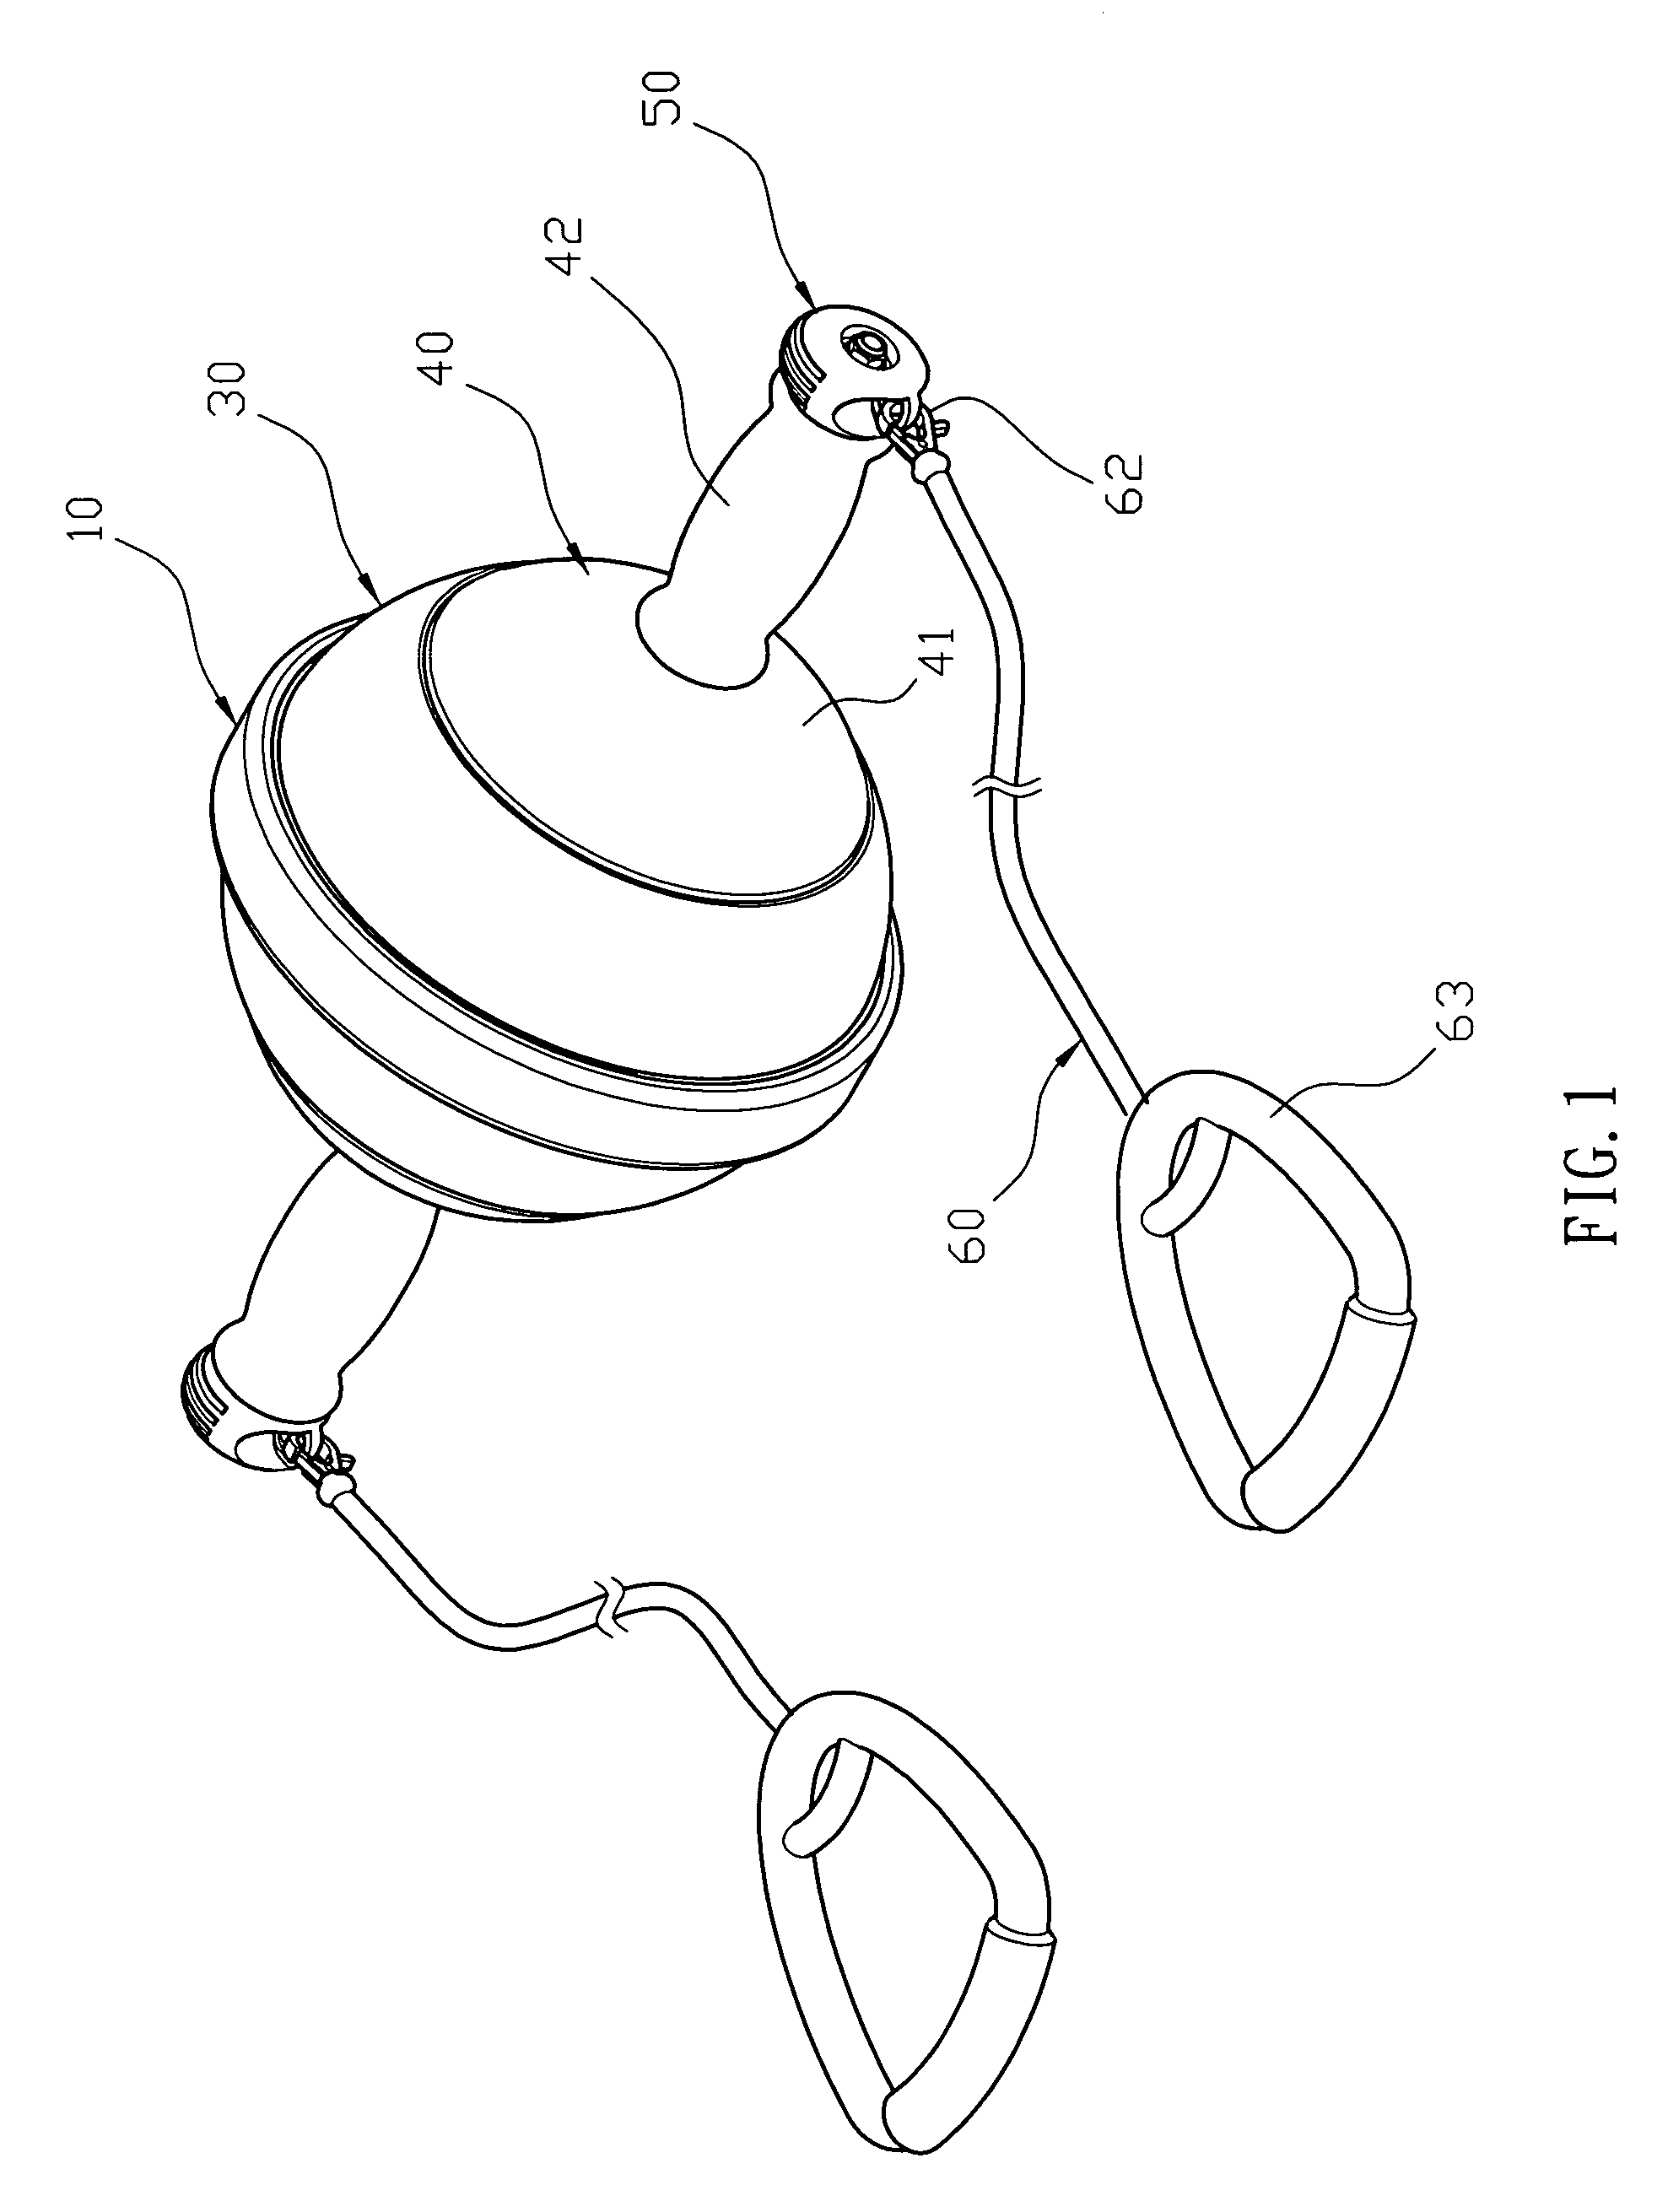 Exercising device having multiple functions